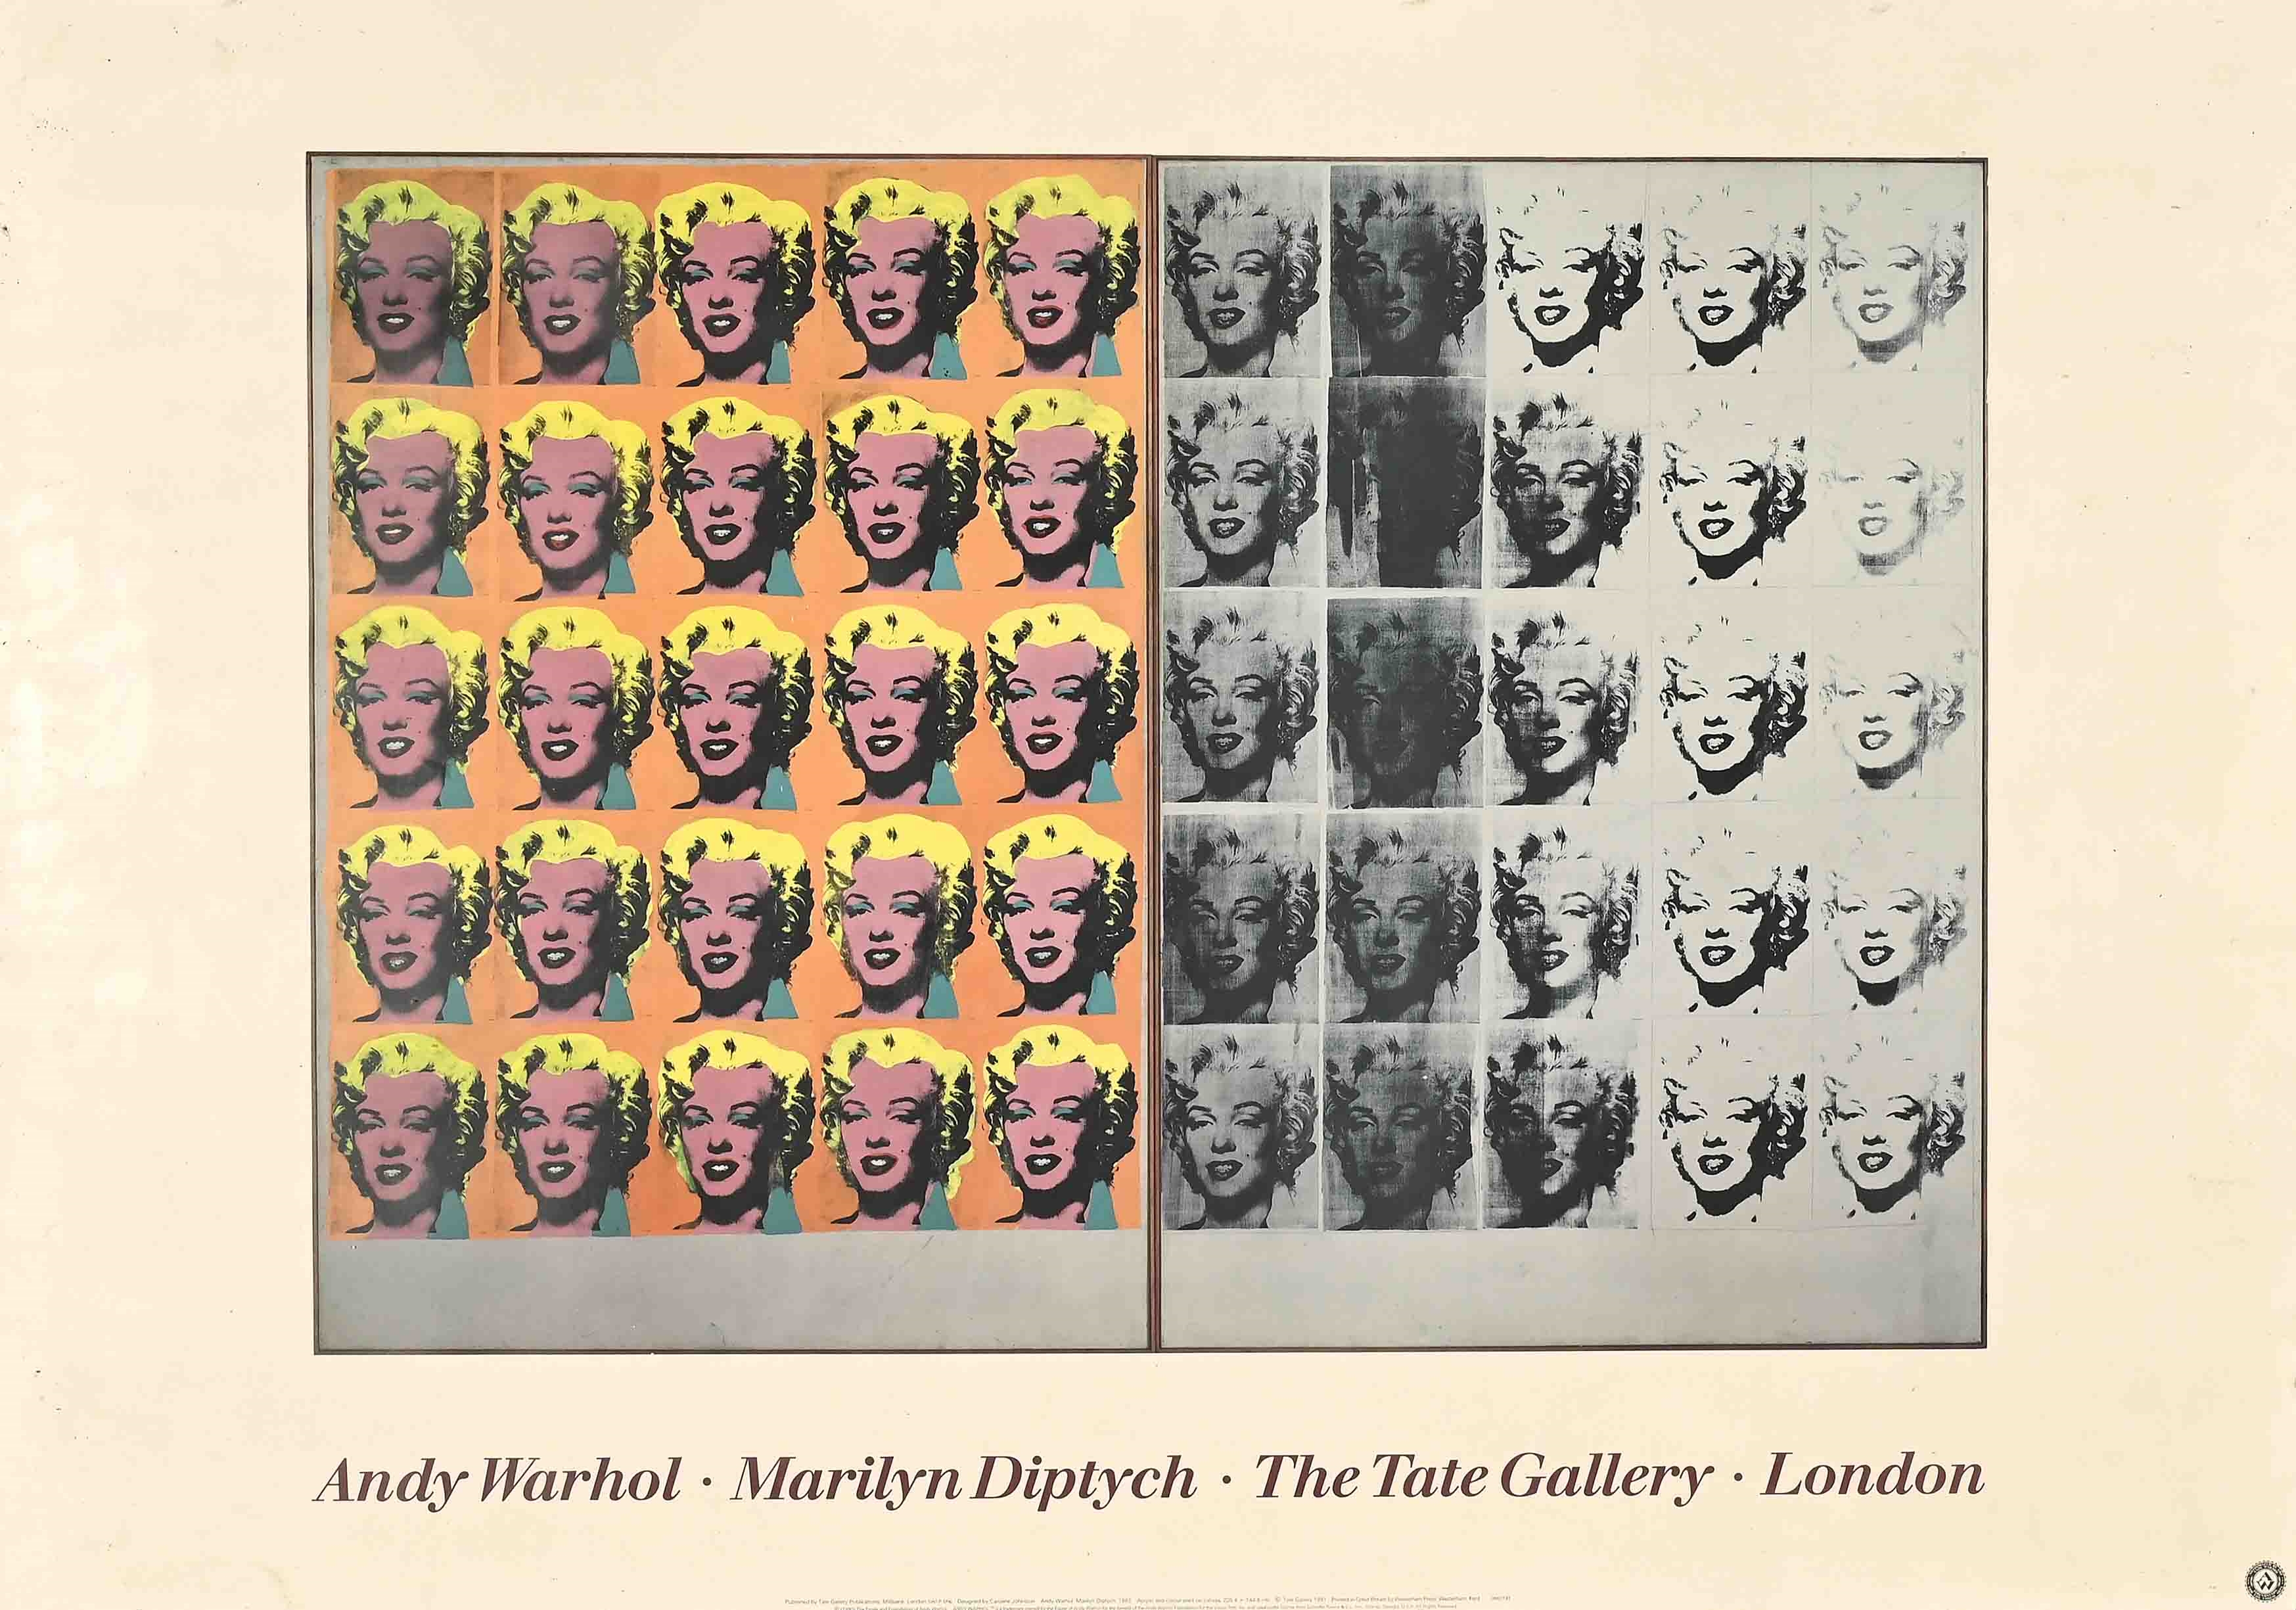 Artwork by Andy Warhol, Marilyn Diptych, Made of photolithograph